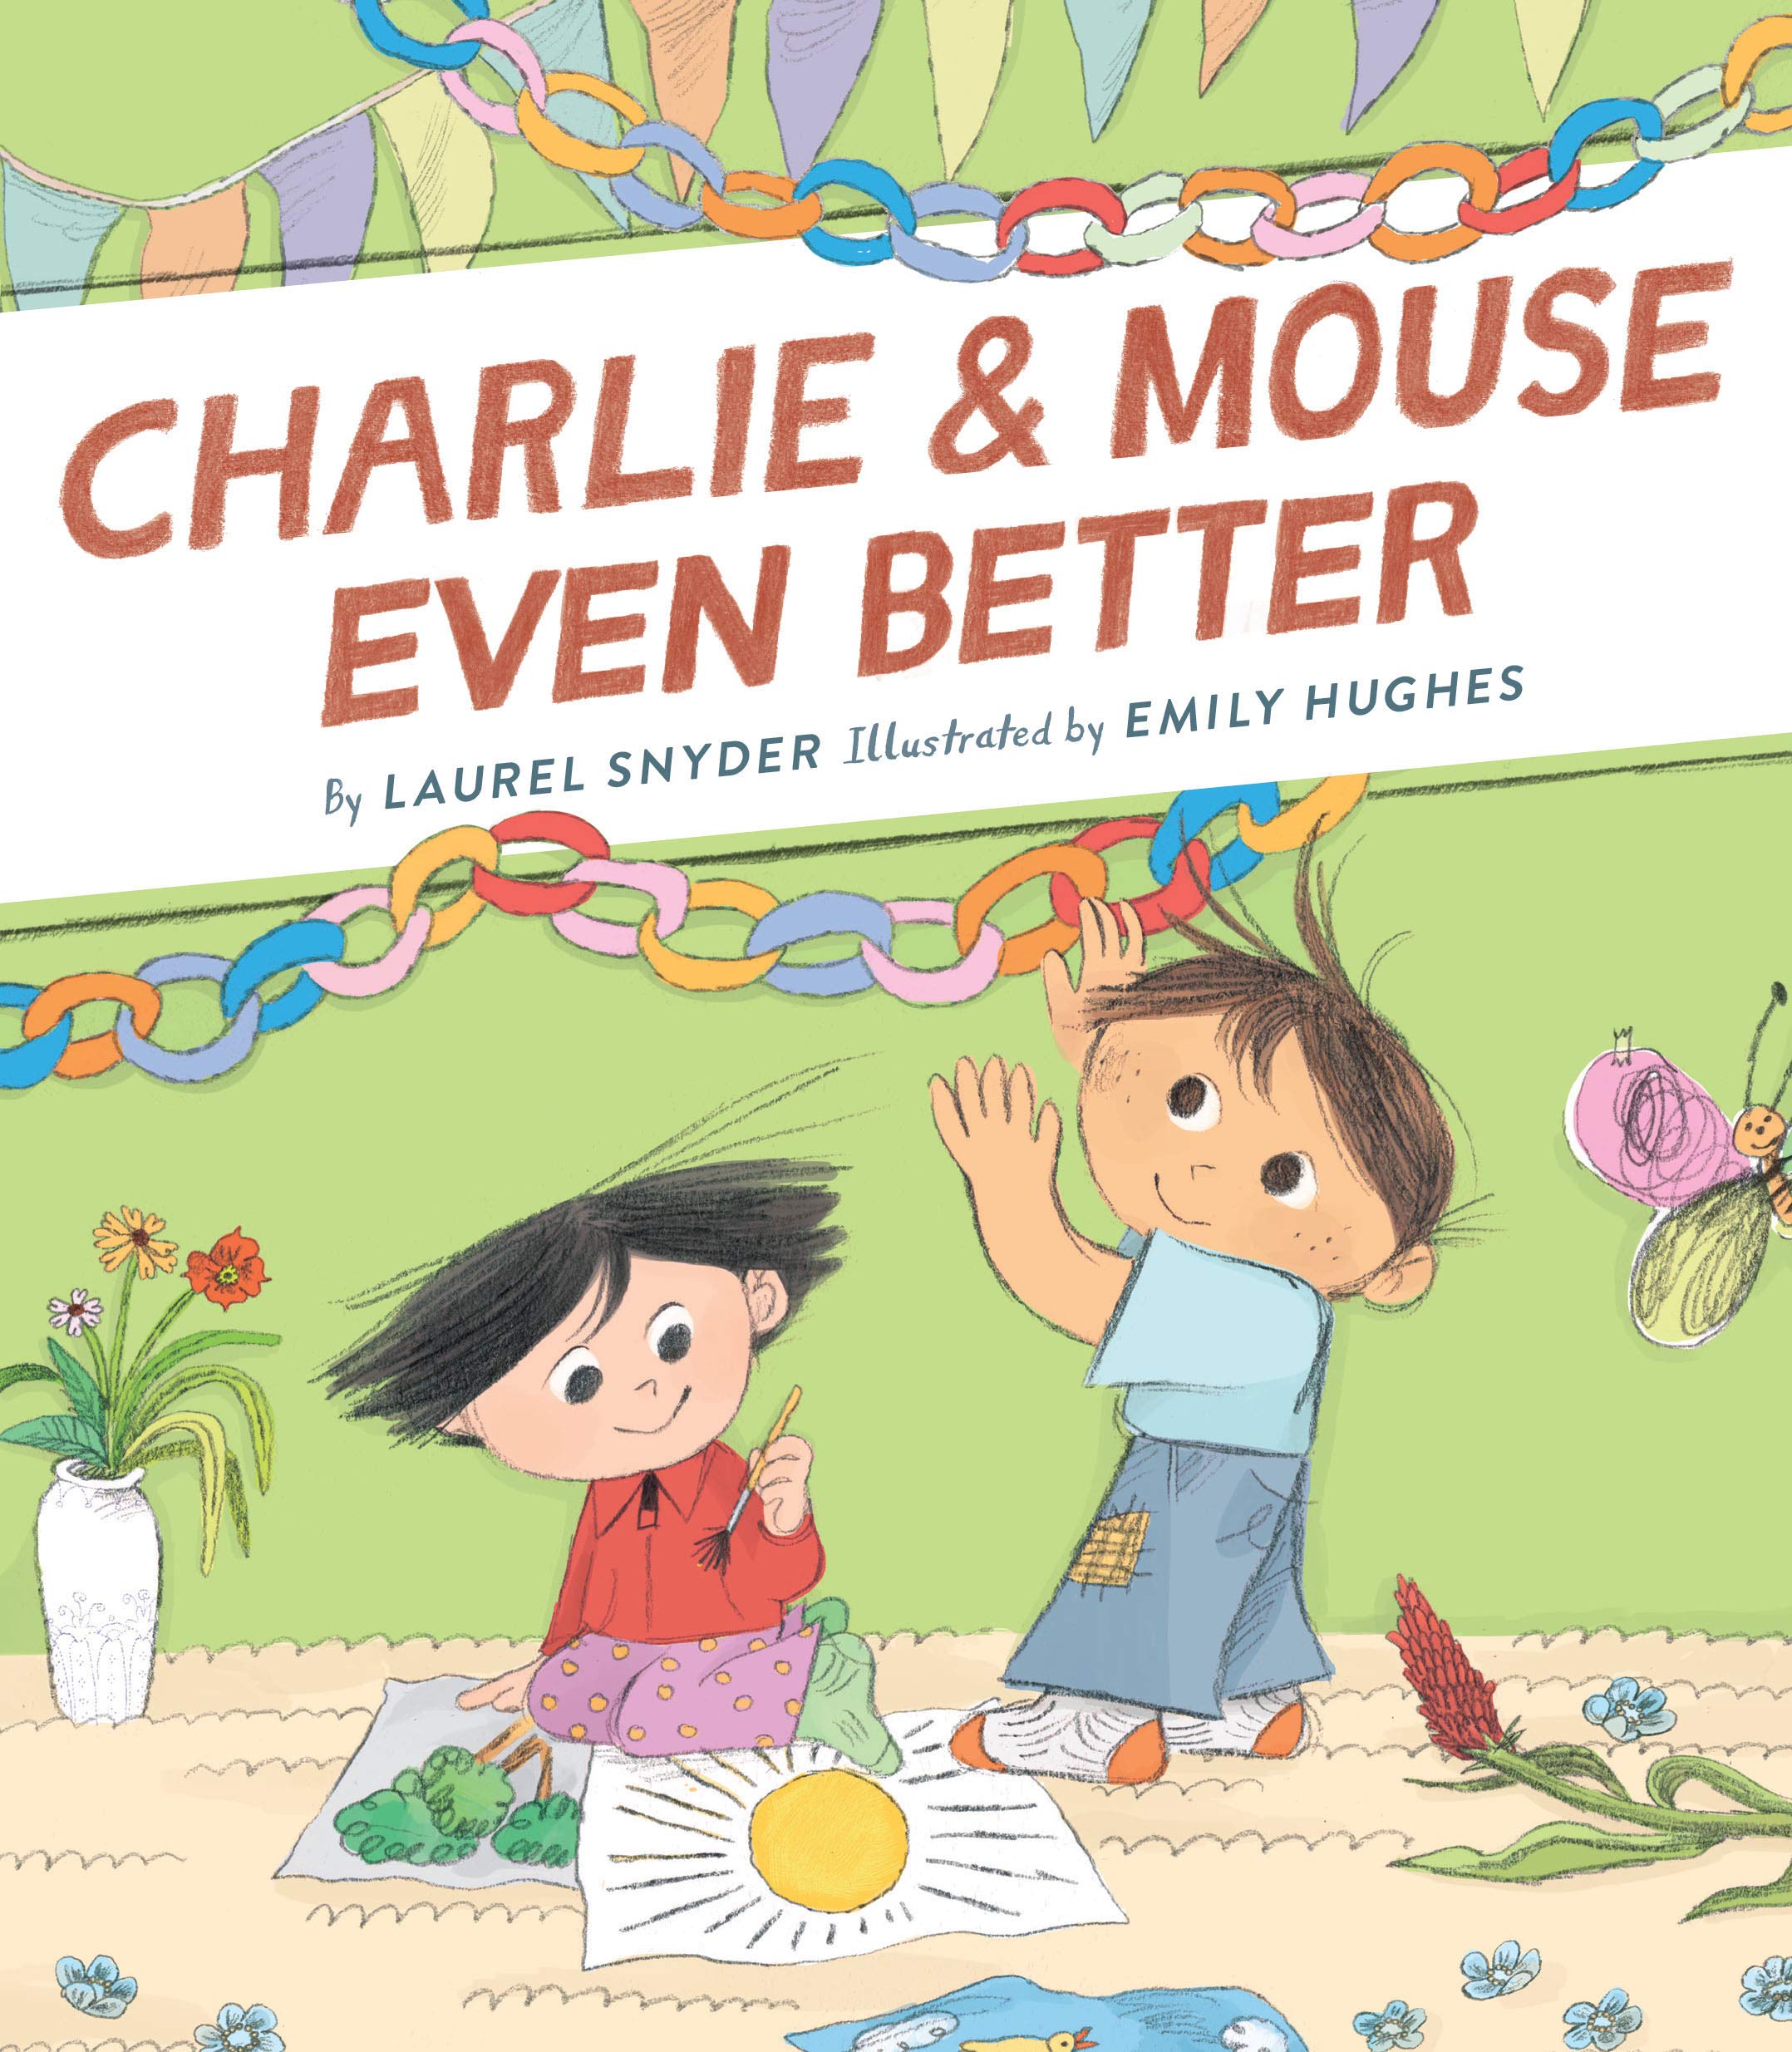 Two young boys decorate for a birthday party on the cover of this early reader, one hanging colorful paper chains and the other drawing a picture of a sun.